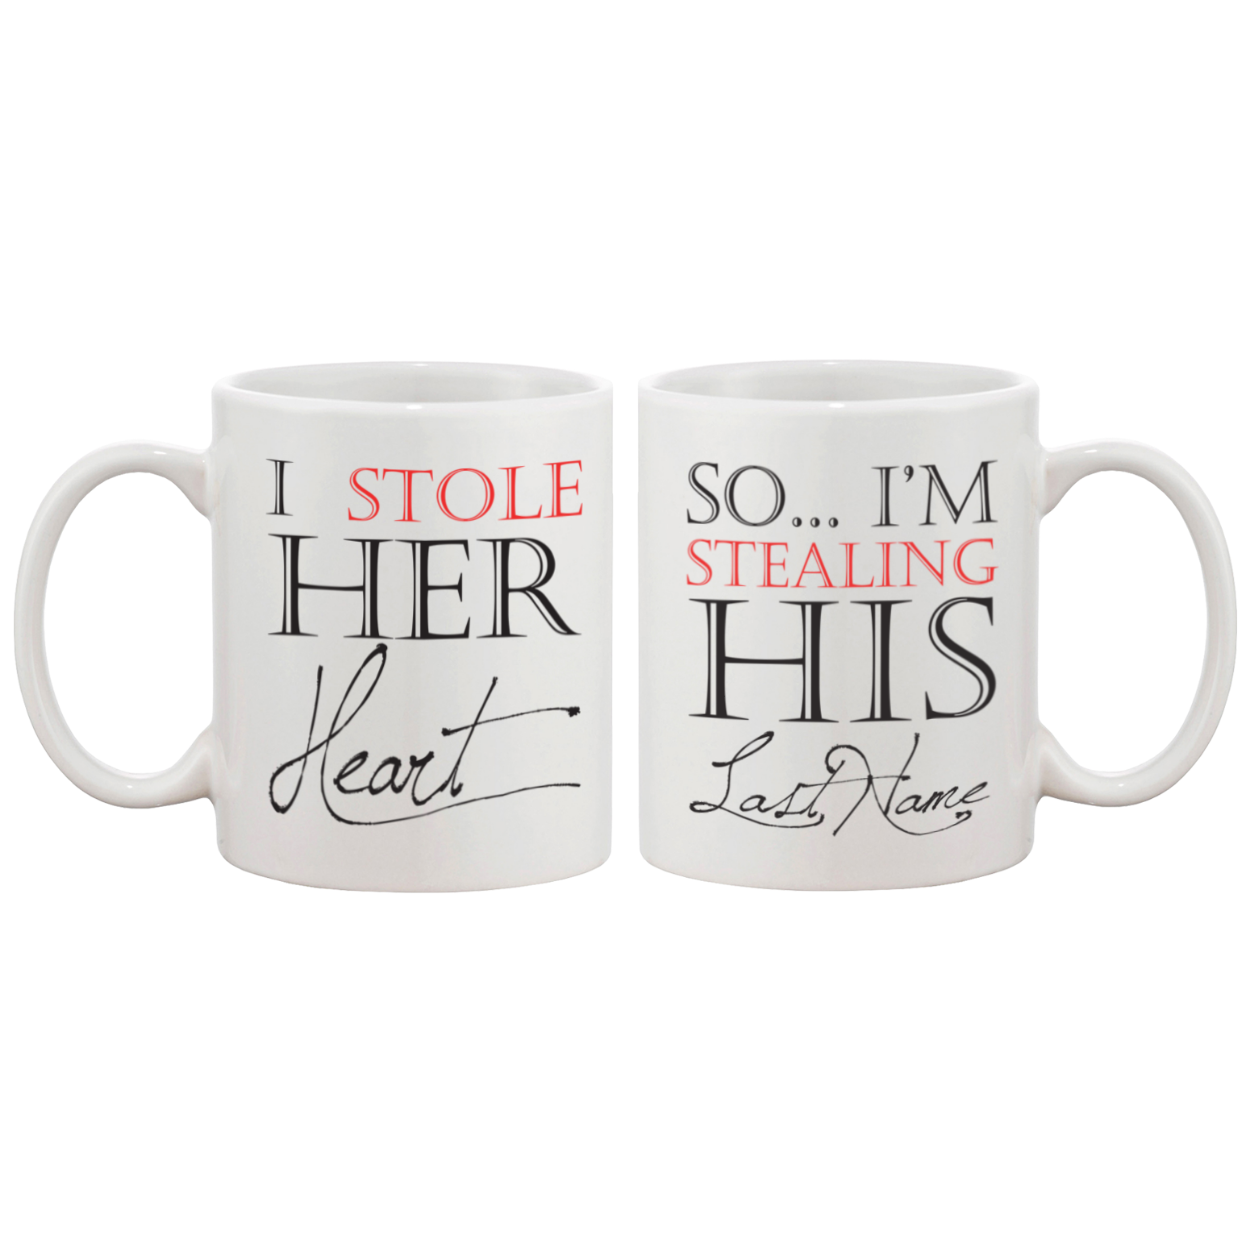 I Stole Her Heart So I'm Stealing His Last Name Couple Mugs - Matching Cup